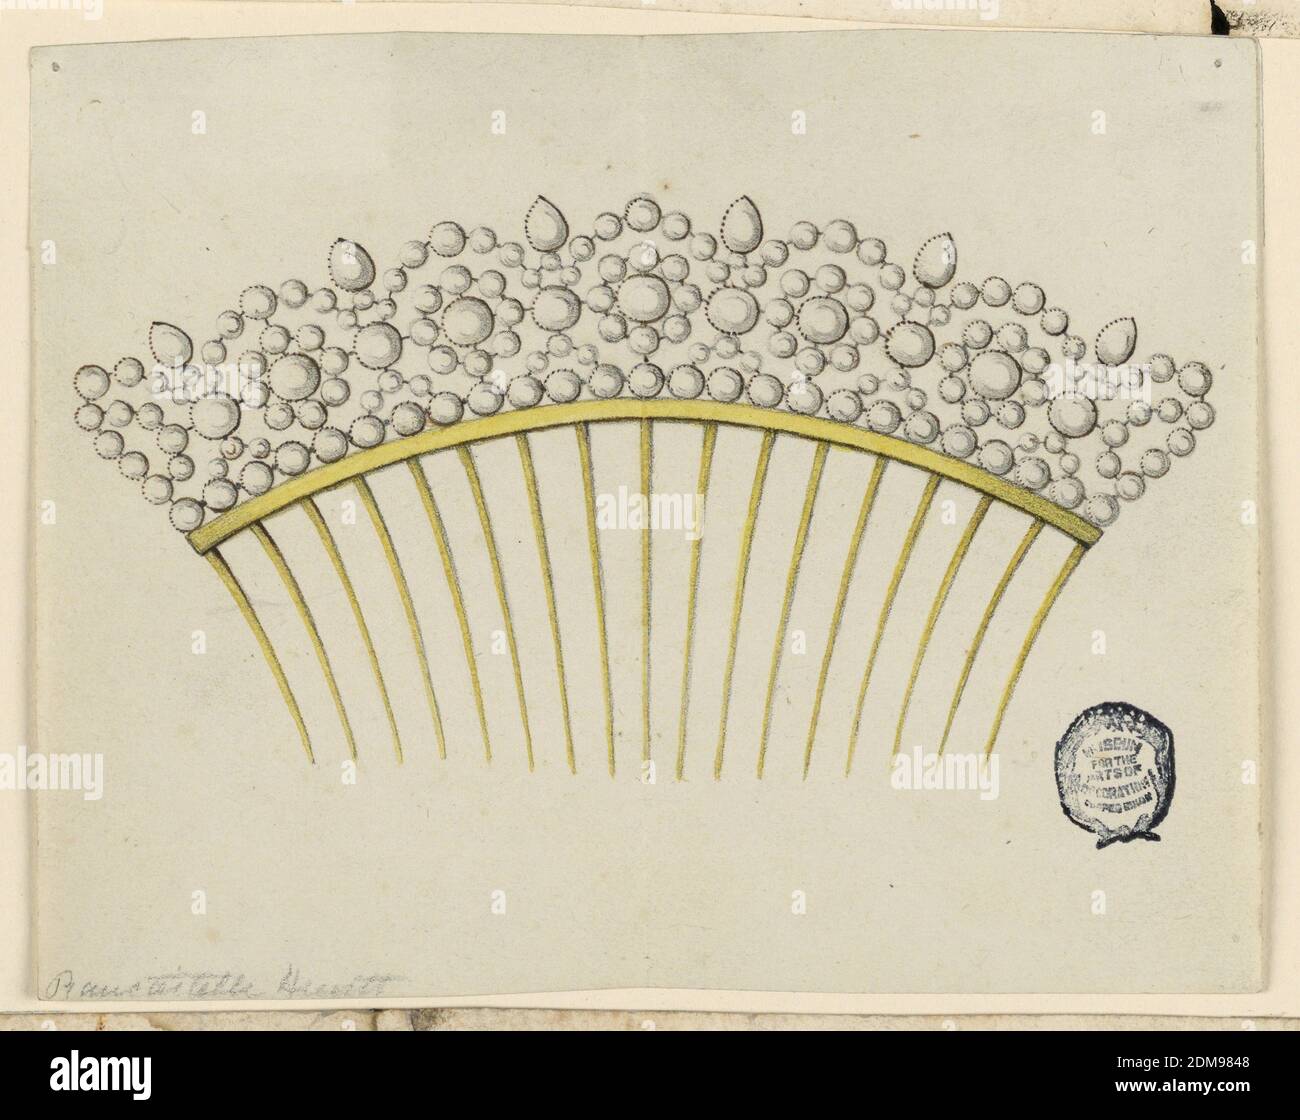 Design for a Comb, Crayon, pen and ink on paper, Seventeen tines springing from a metal band. The crest boarder is composed of round diamonds in various sizes. Six drop-shaped stones above, in the intervals between the circles, forming a row below the scehem of hte decoration. Inside the circles are blossoms., Italy, 1820, jewelry, Drawing Stock Photo